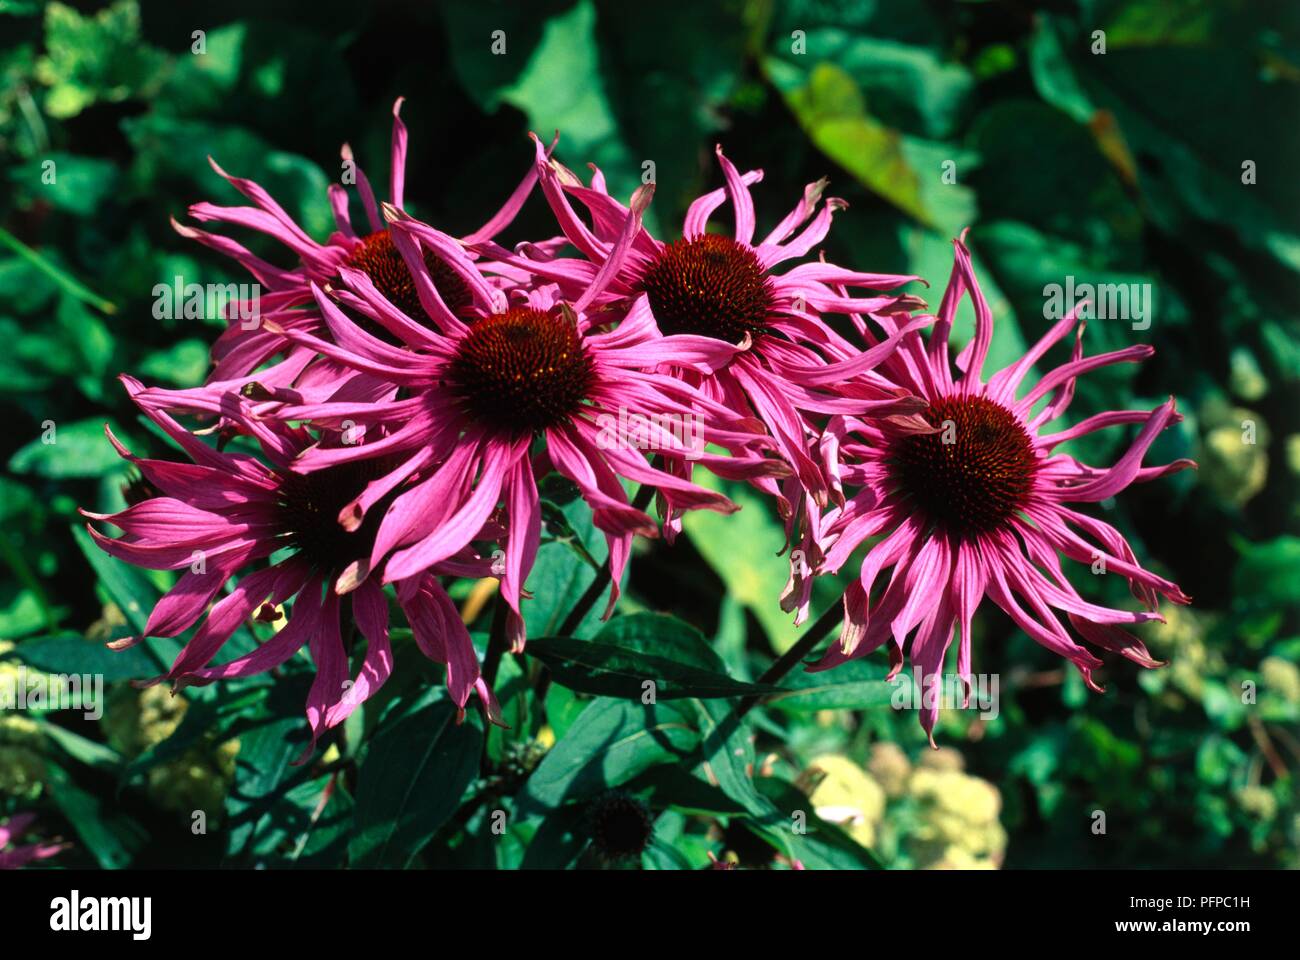 Echinacea purpurea 'Magnus', with deep pink flowers and green leaves Stock Photo